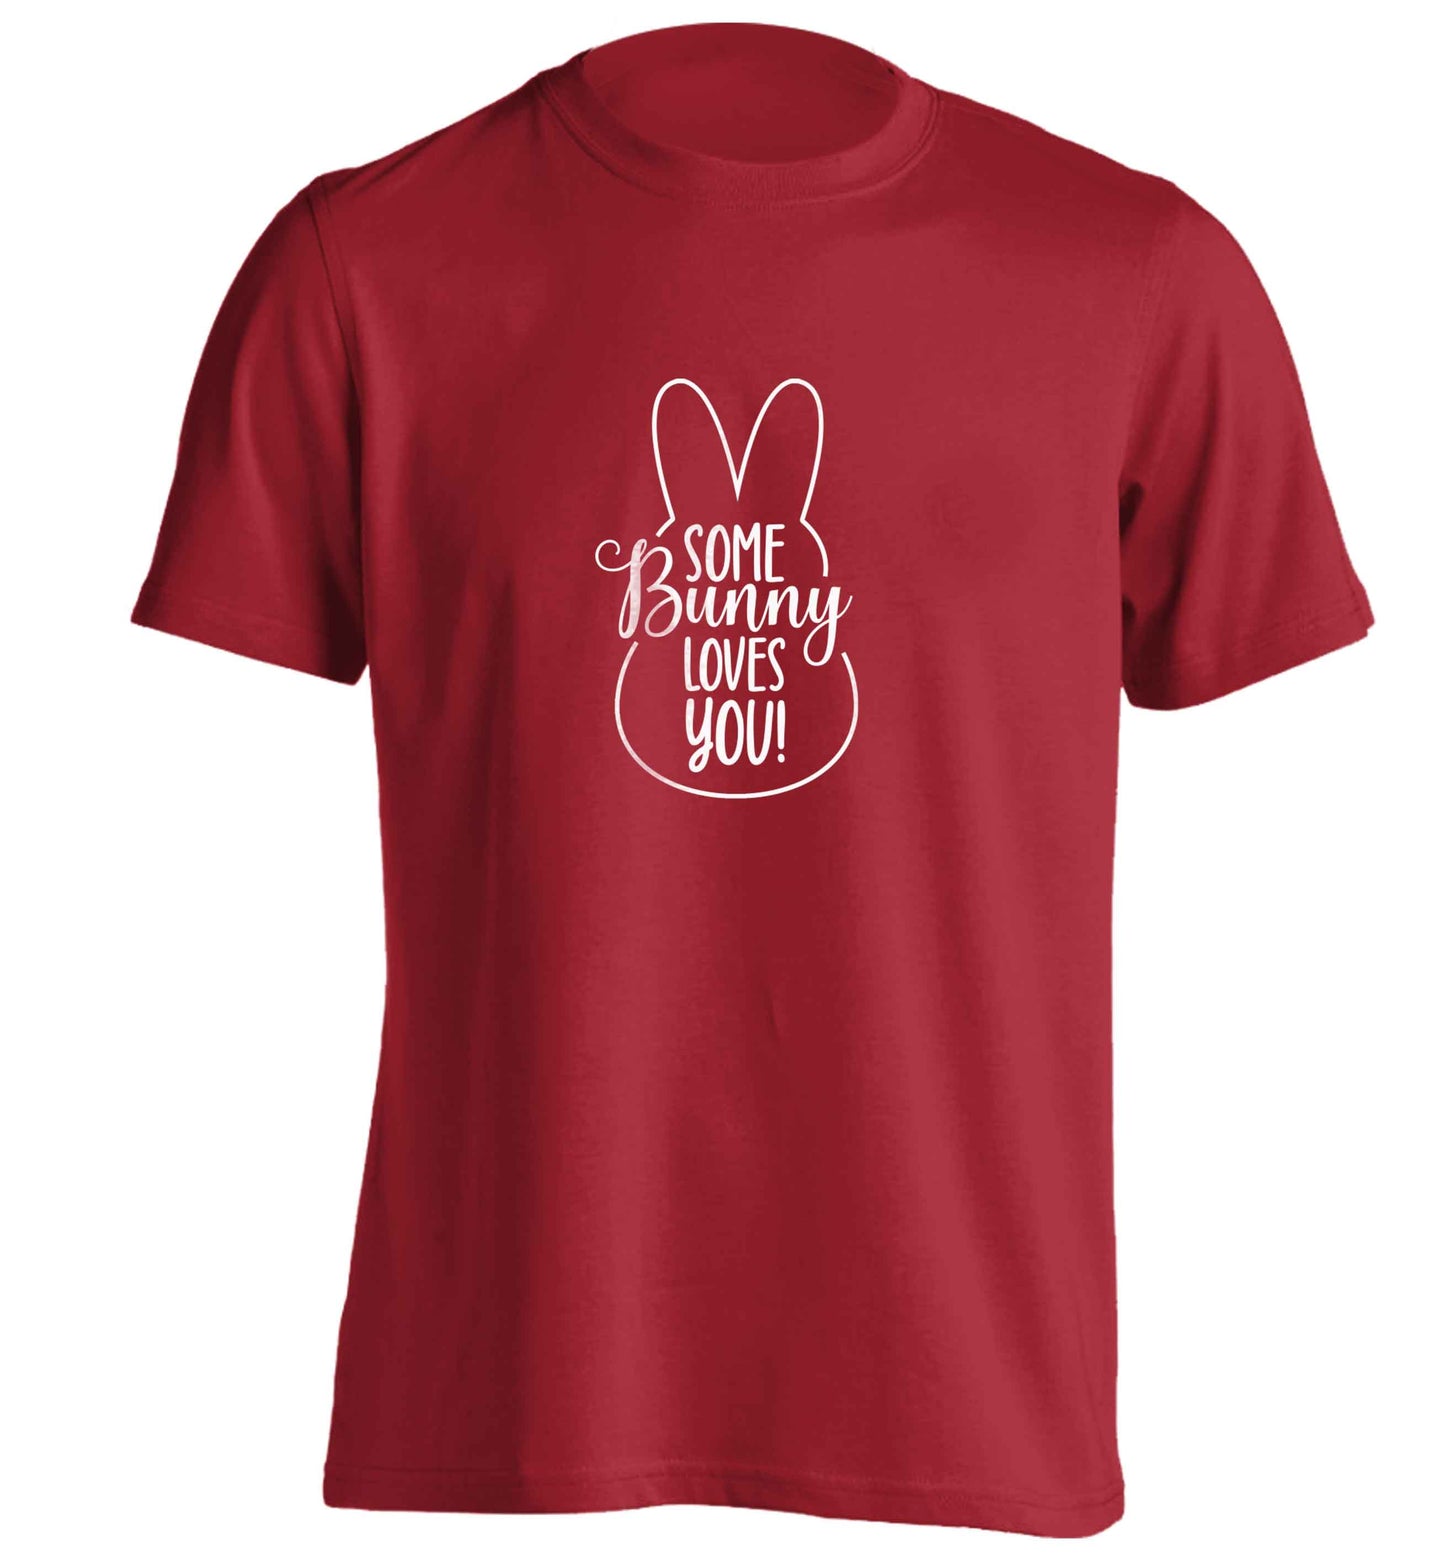 Some bunny loves you adults unisex red Tshirt 2XL